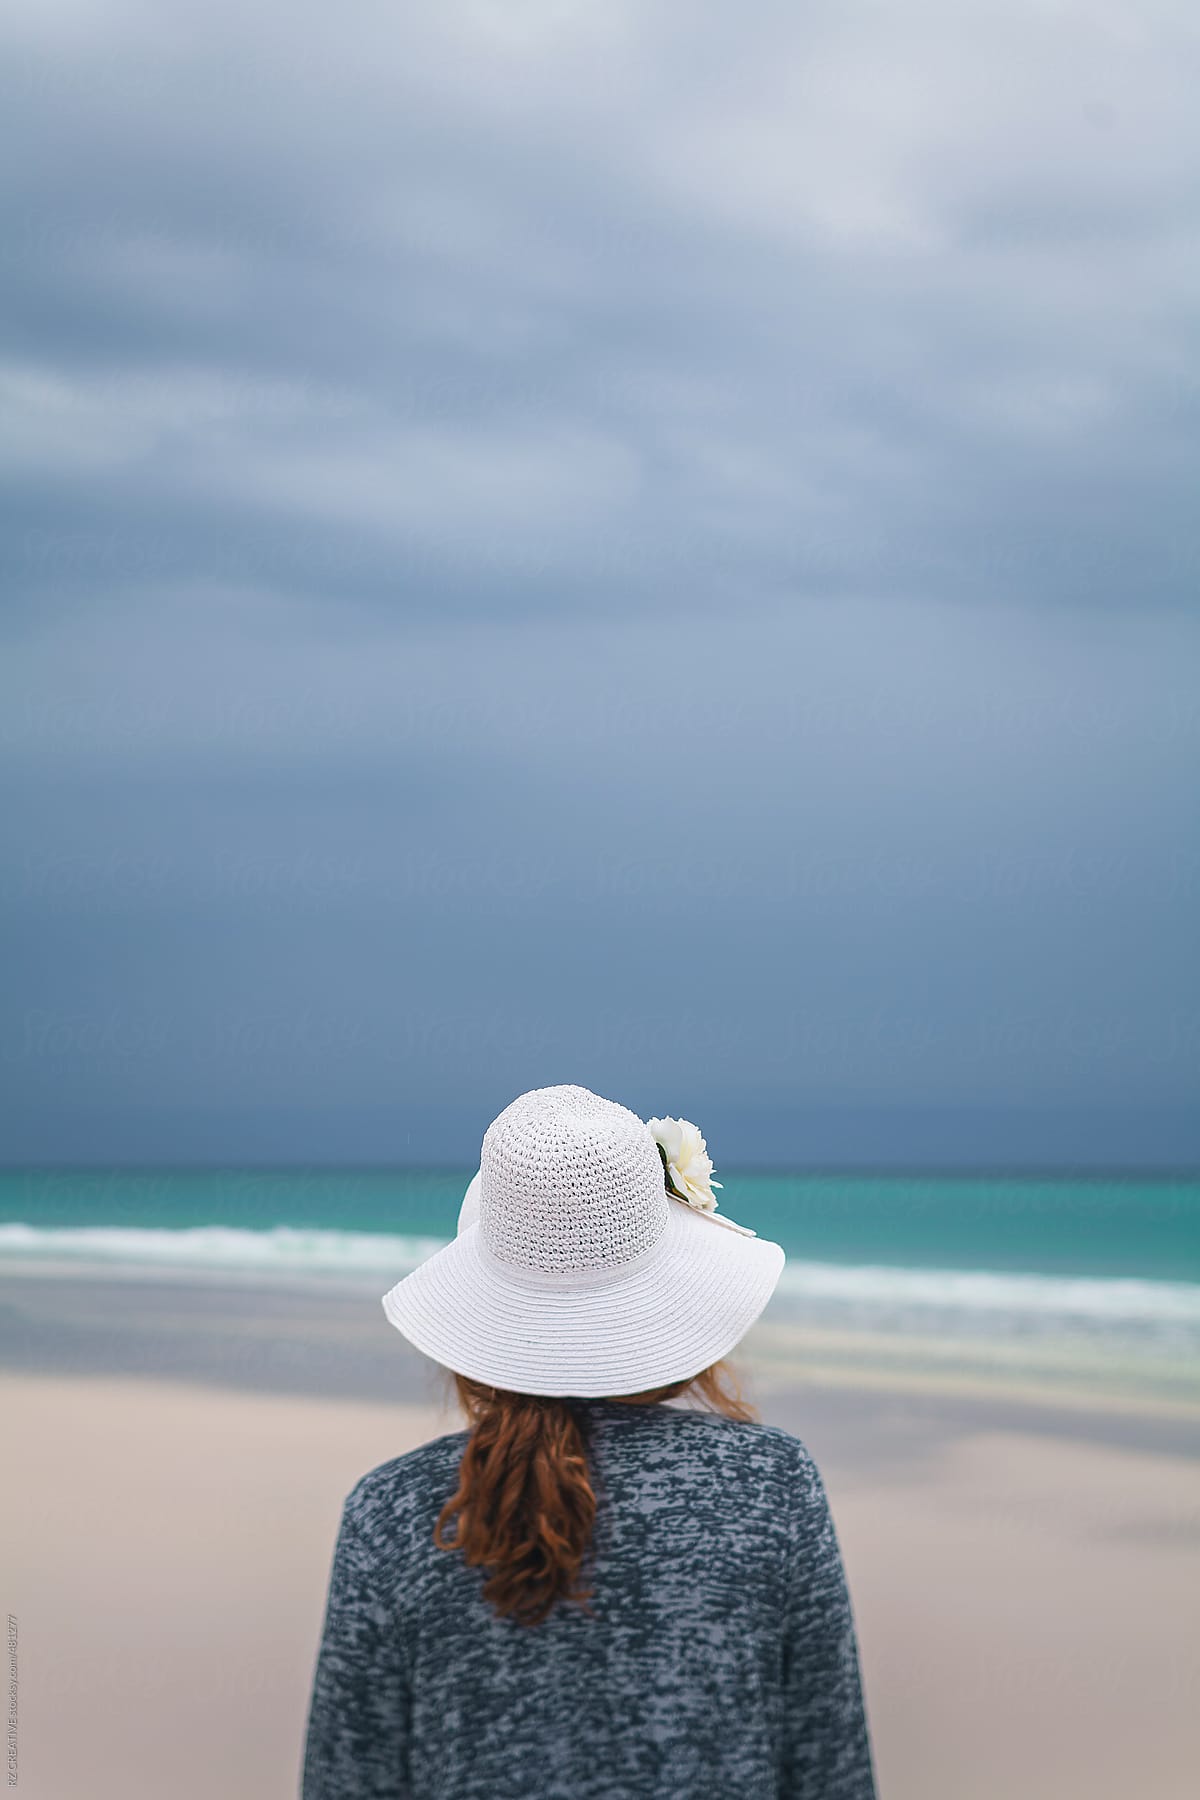 Woman with white sunhat at beach.